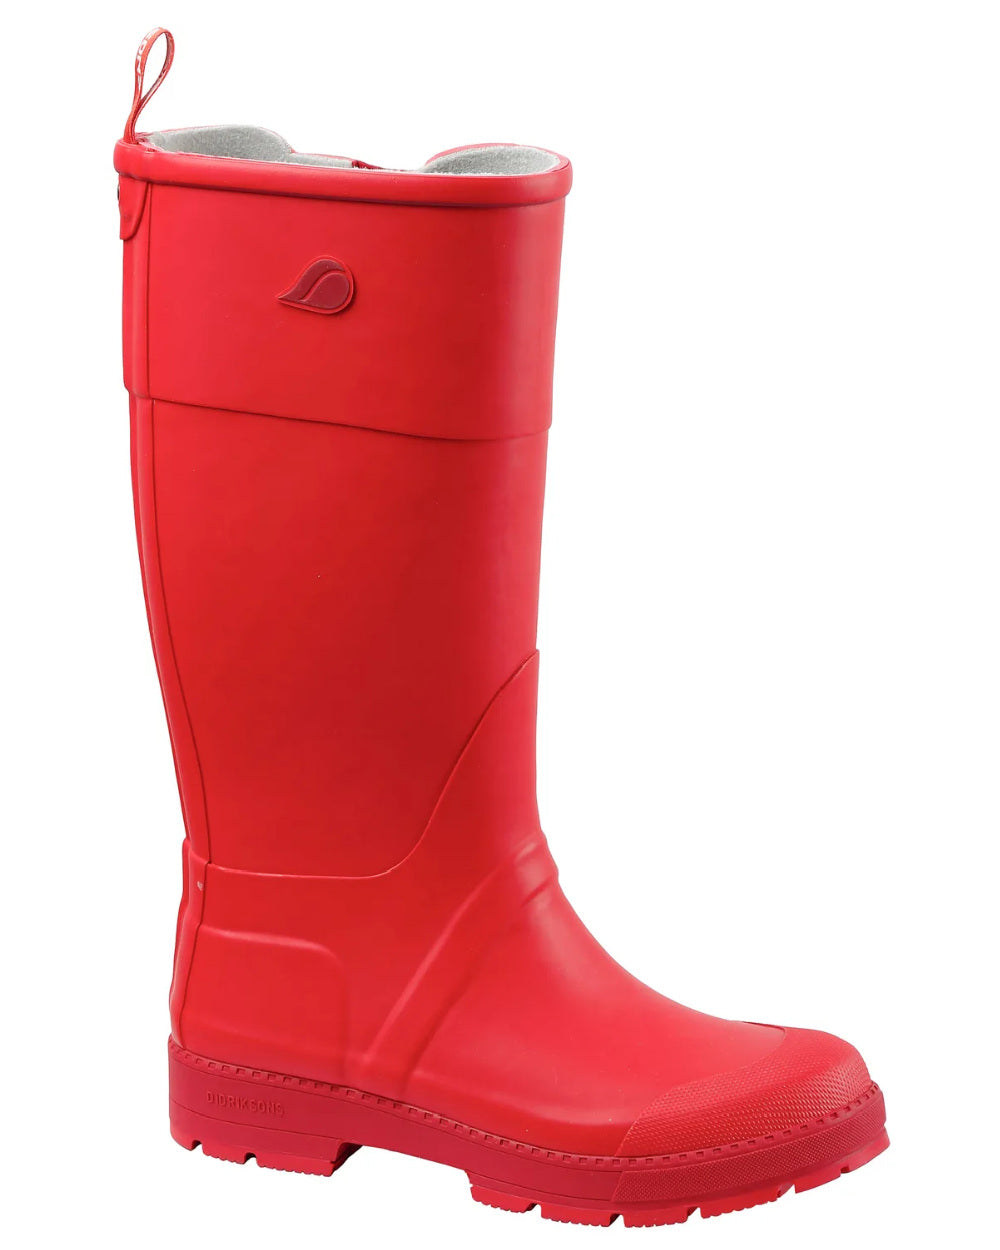 Chili Red Coloured Didriksons Koster Womens Rubber Boots On A White Background 